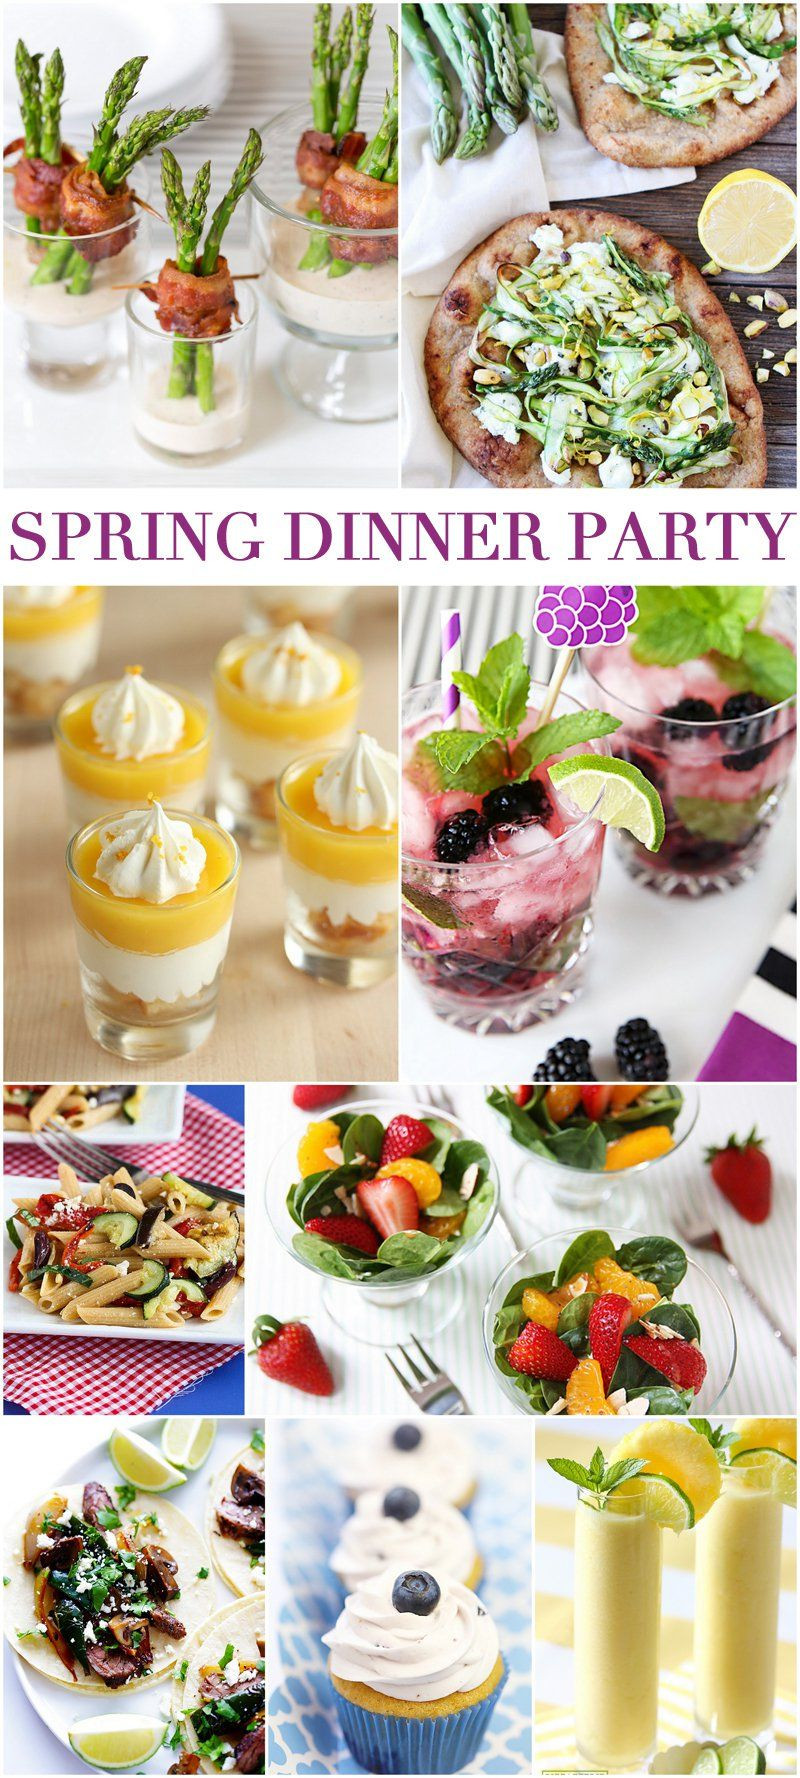 Menu Ideas For Summer Dinner Party
 Host a Spring Dinner Party in Style